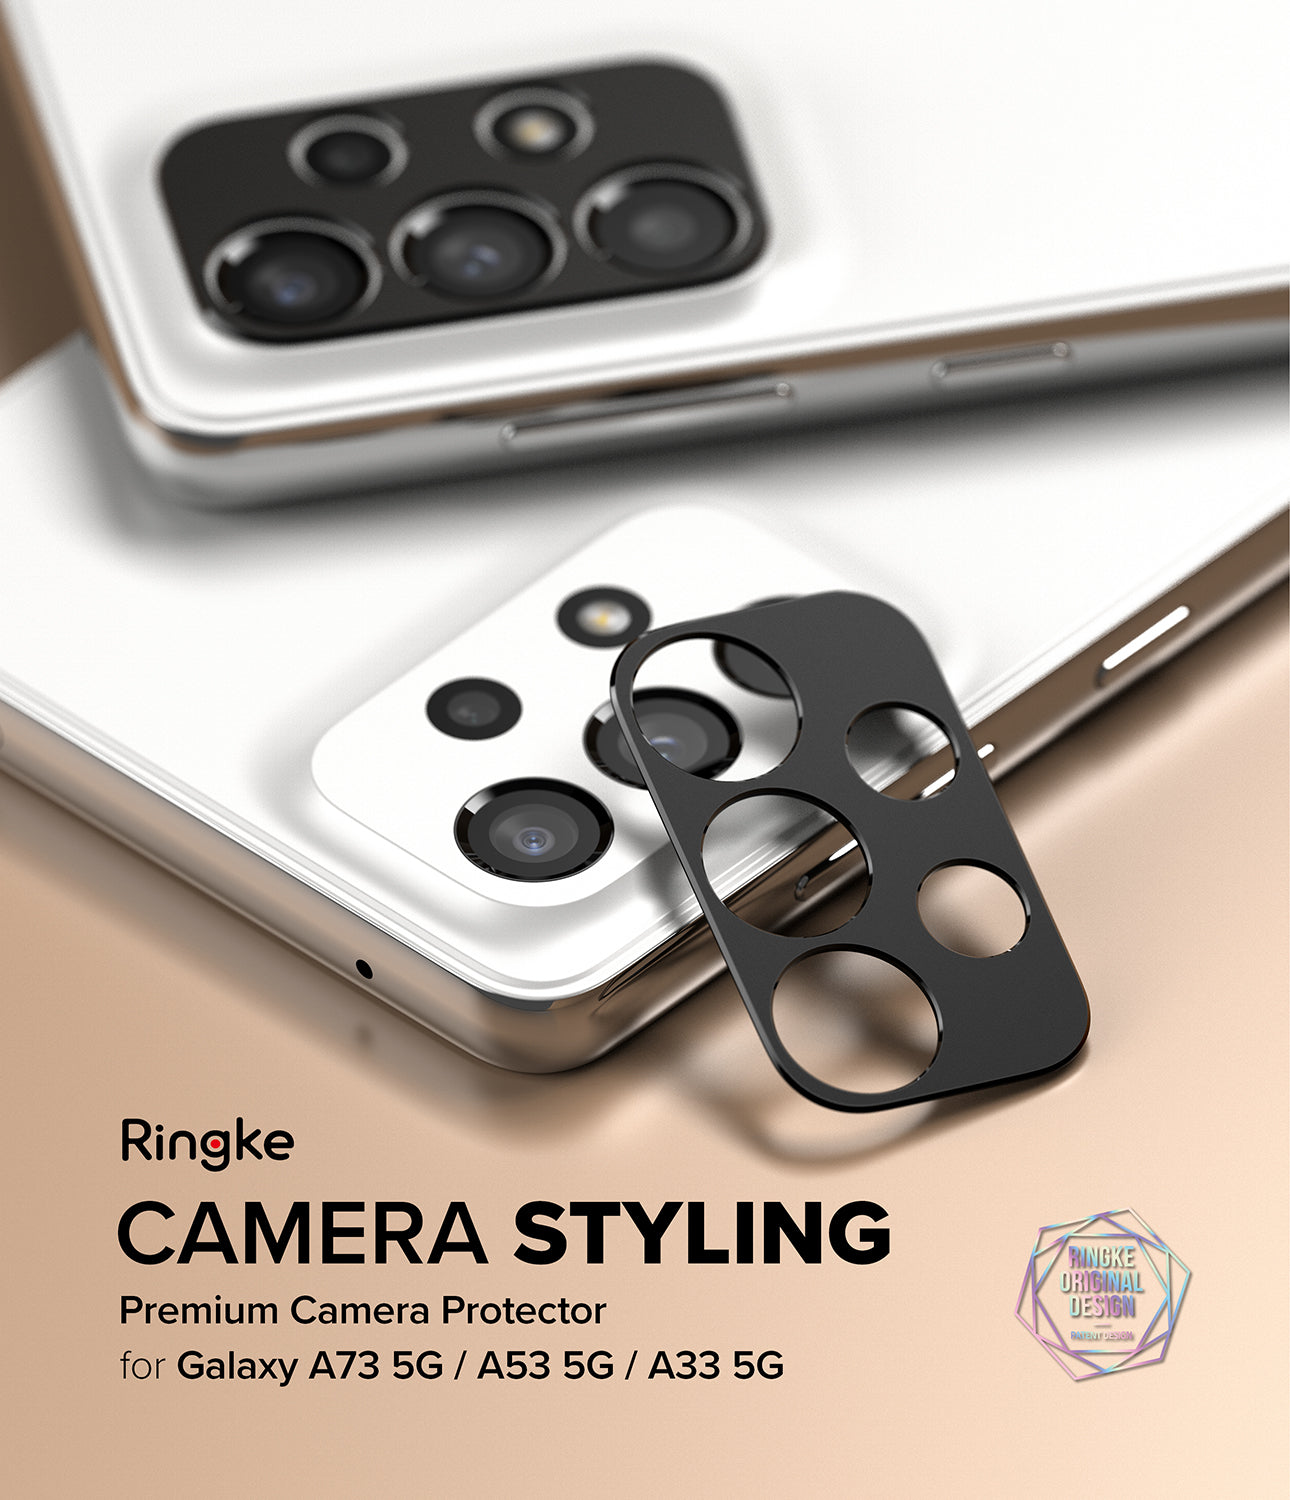 Galaxy A33 5G / A53 5G / A73 5G | Camera Styling - Ringke Official Store